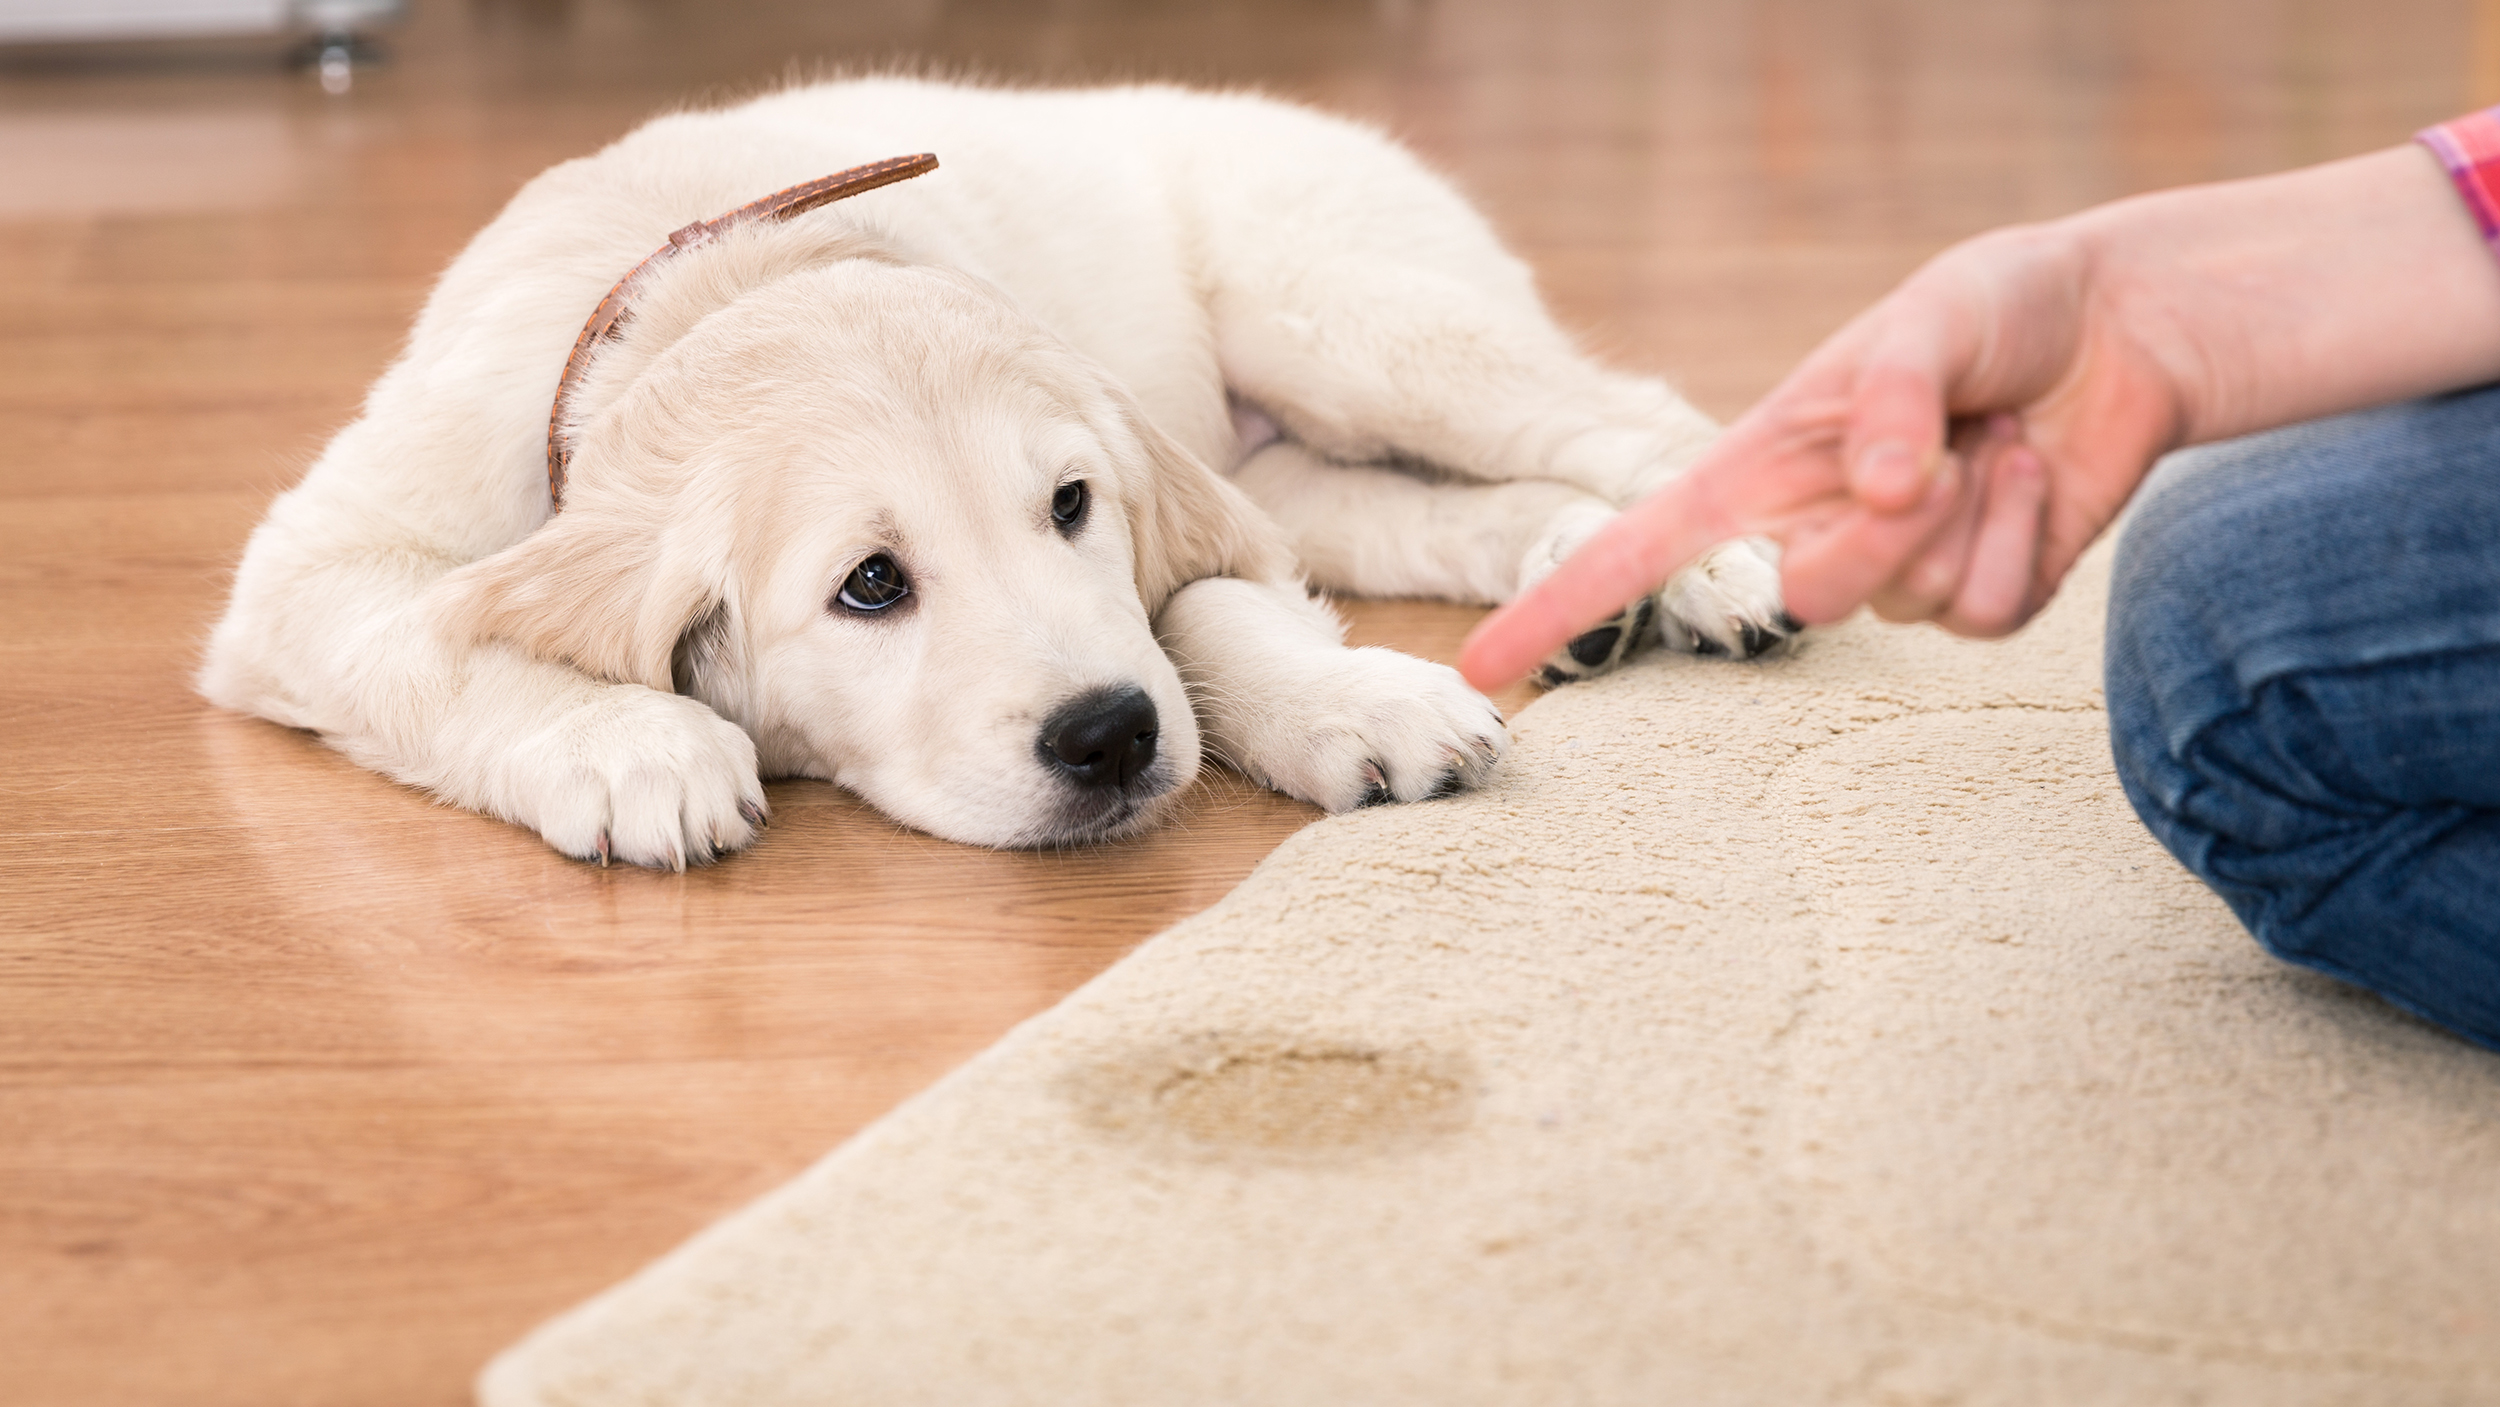 how do you get the dog pee smell out of carpet